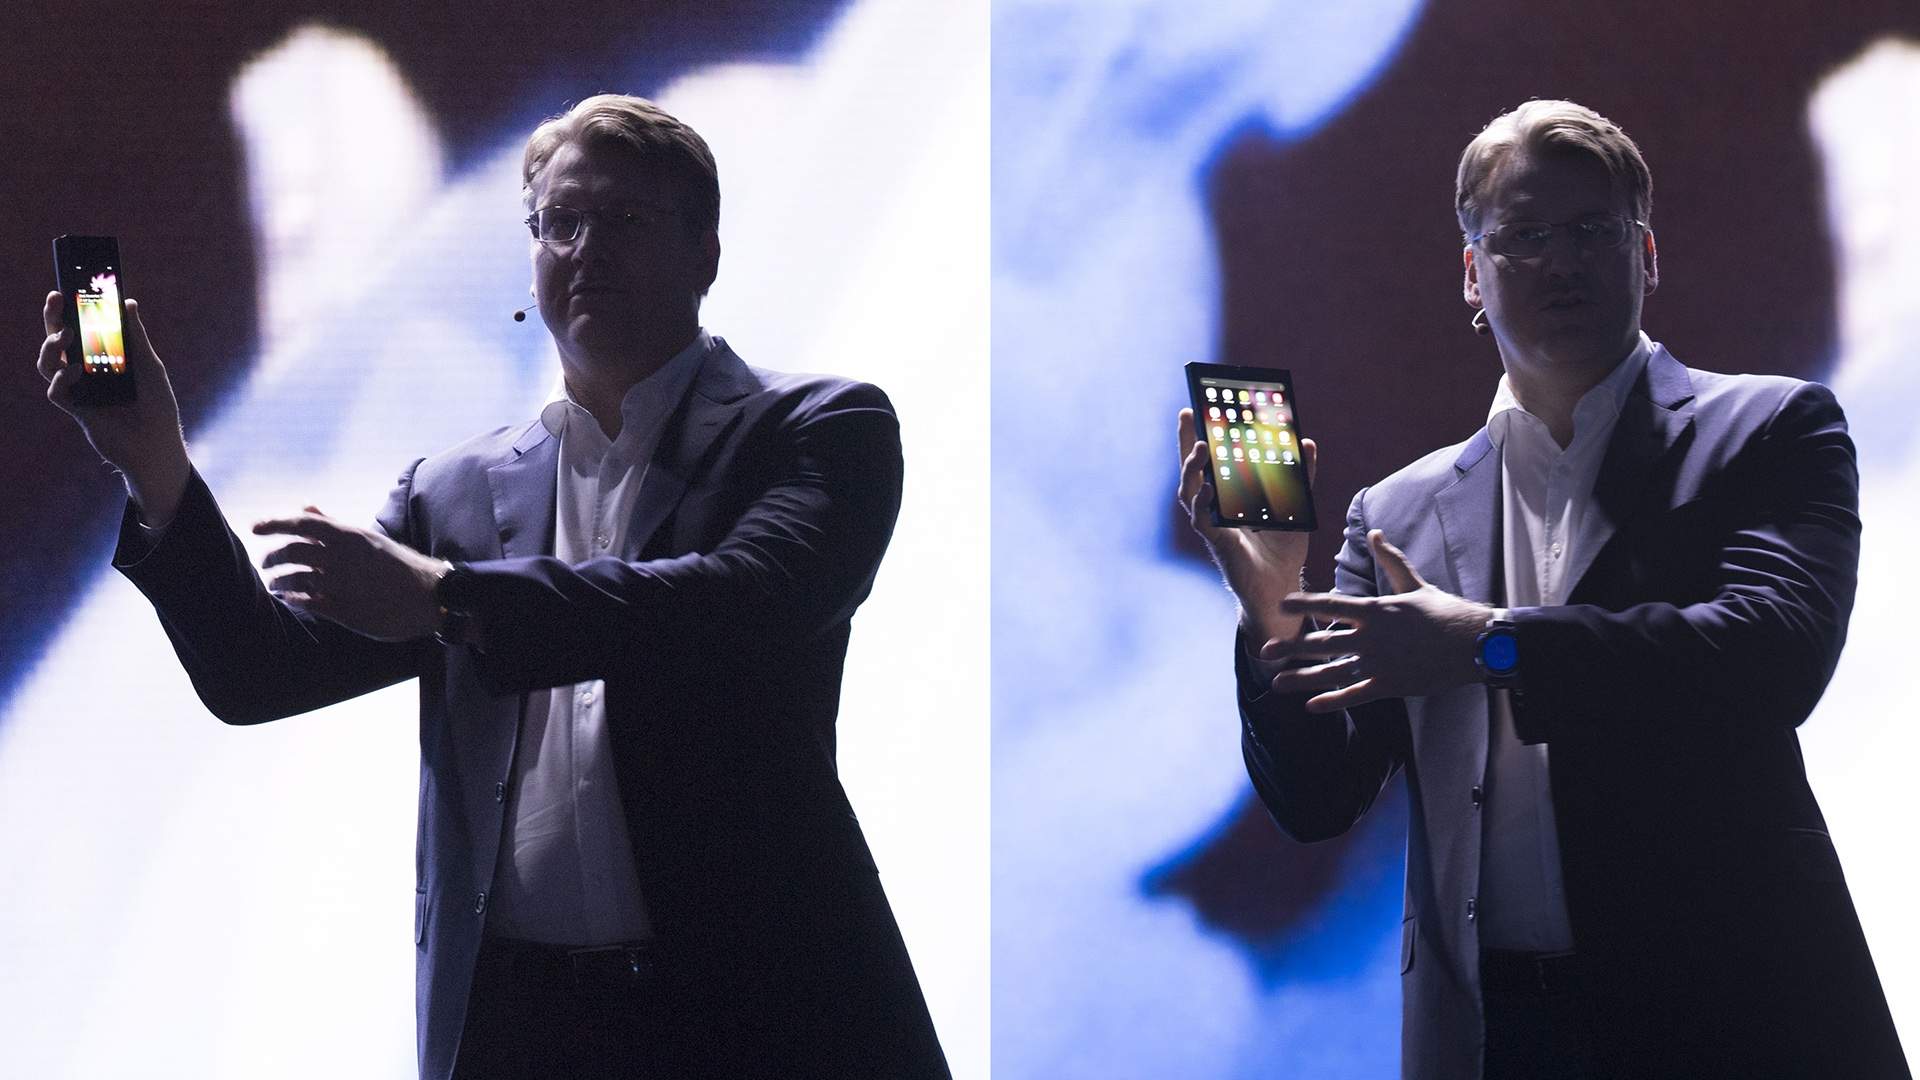 Samsung Has Unveiled a Foldable Smartphone That Opens Into a Tablet